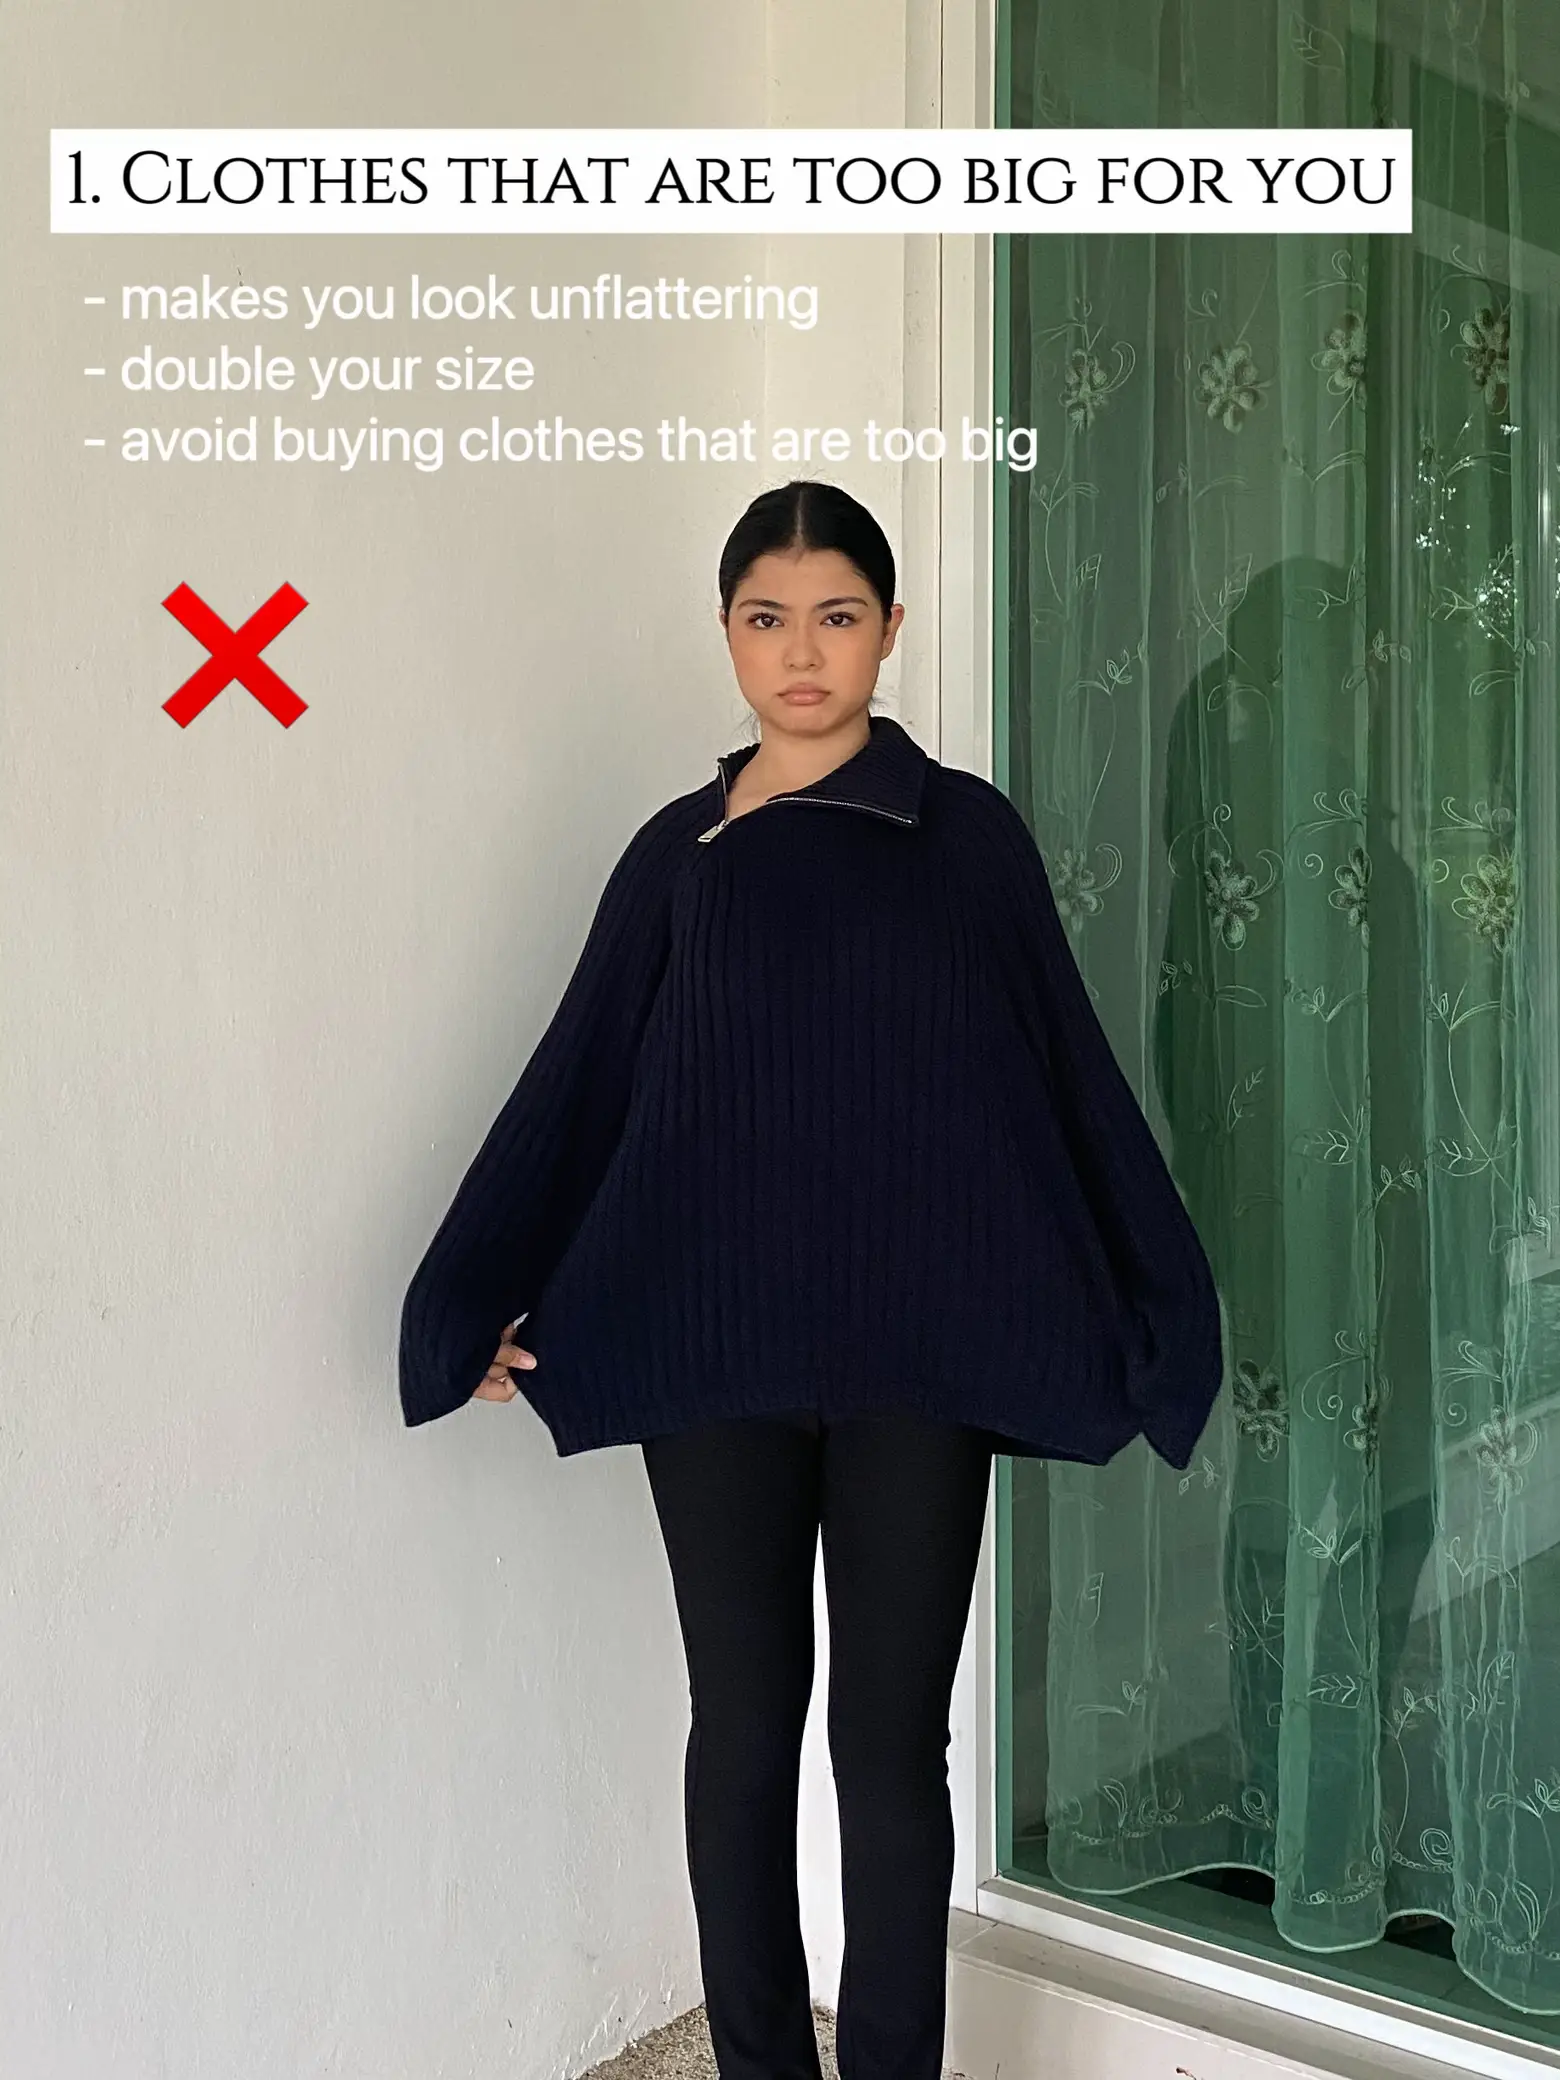 AVOID THESE CLOTHING TO LOOK UNSTYLISH!